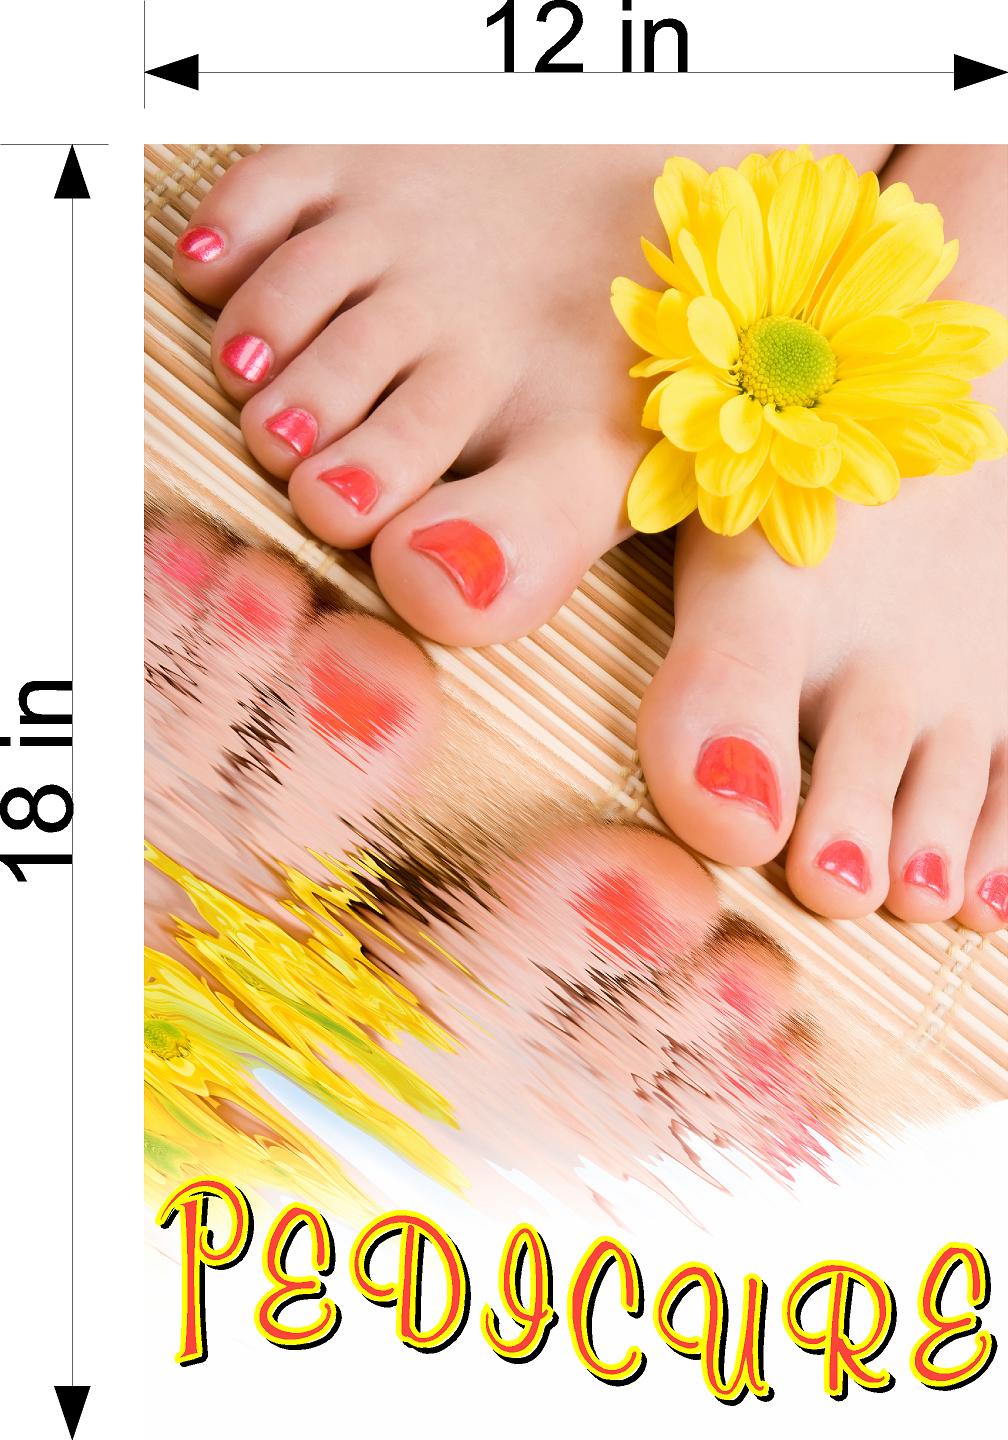 Pedicure 26 Wallpaper Fabric Poster Decal with Adhesive Backing Wall Sticker Decor Indoors Interior Sign Vertical